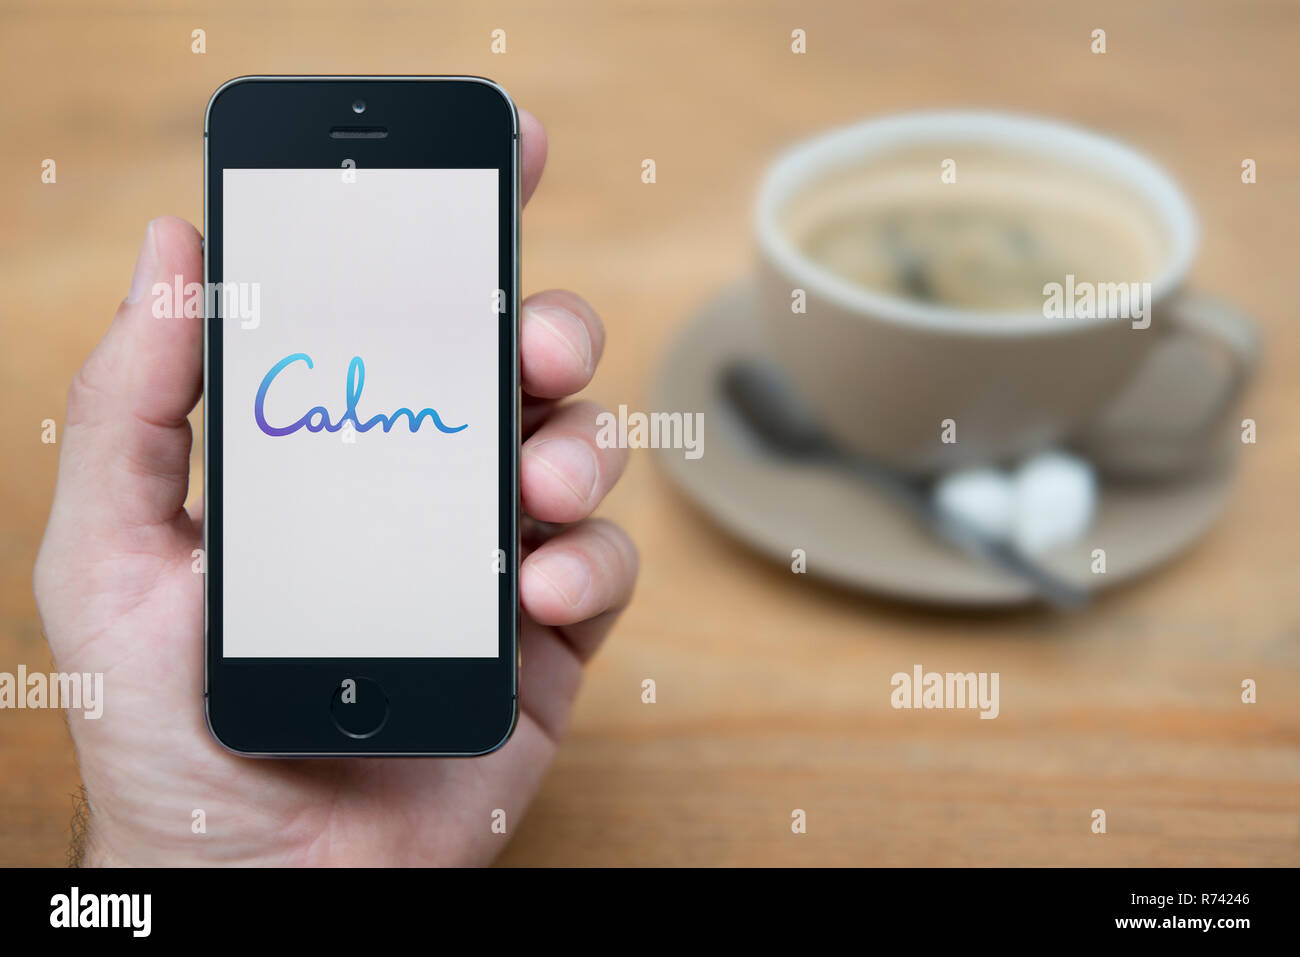 A man looks at his iPhone which displays the Calm logo (Editorial use only). Stock Photo